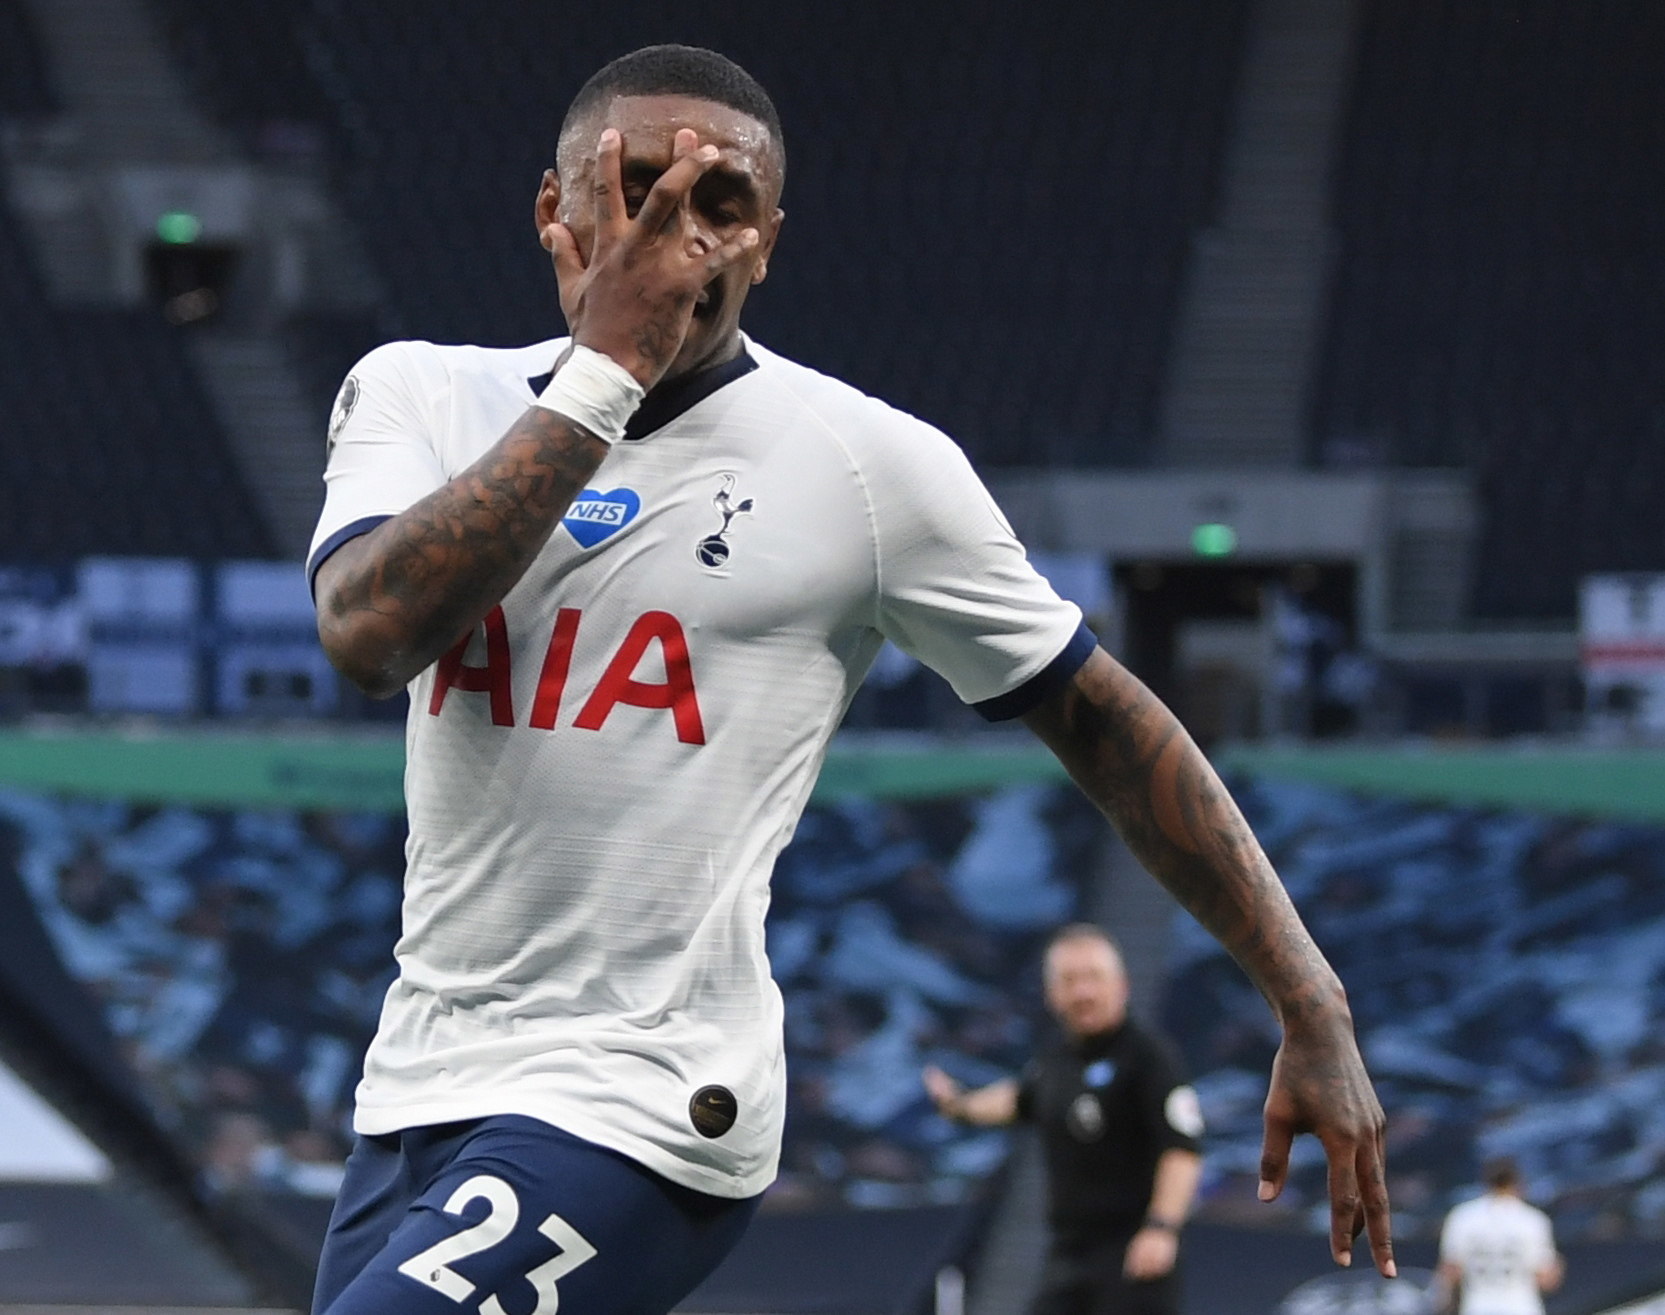 London (United Kingdom), 19/06/2020.- Tottenham Hotspurs midfielder Steven lt;HIT gt;Bergwijn lt;/HIT gt; celebrates scoring a goal during the English Premier League soccer match between Tottenham Hotspur and Manchester United in London, Britain, 19 June 2020. (Reino Unido, Londres) EFE/EPA/SHAUN BOTTERILL / NMC / GETTY IMAGES POOL EDITORIAL USE ONLY. No use with unauthorized audio, video, data, fixture lists, club/league logos or live services. Online in-match use limited to 120 images, no video emulation. No use in betting, games or single club/league/player publications